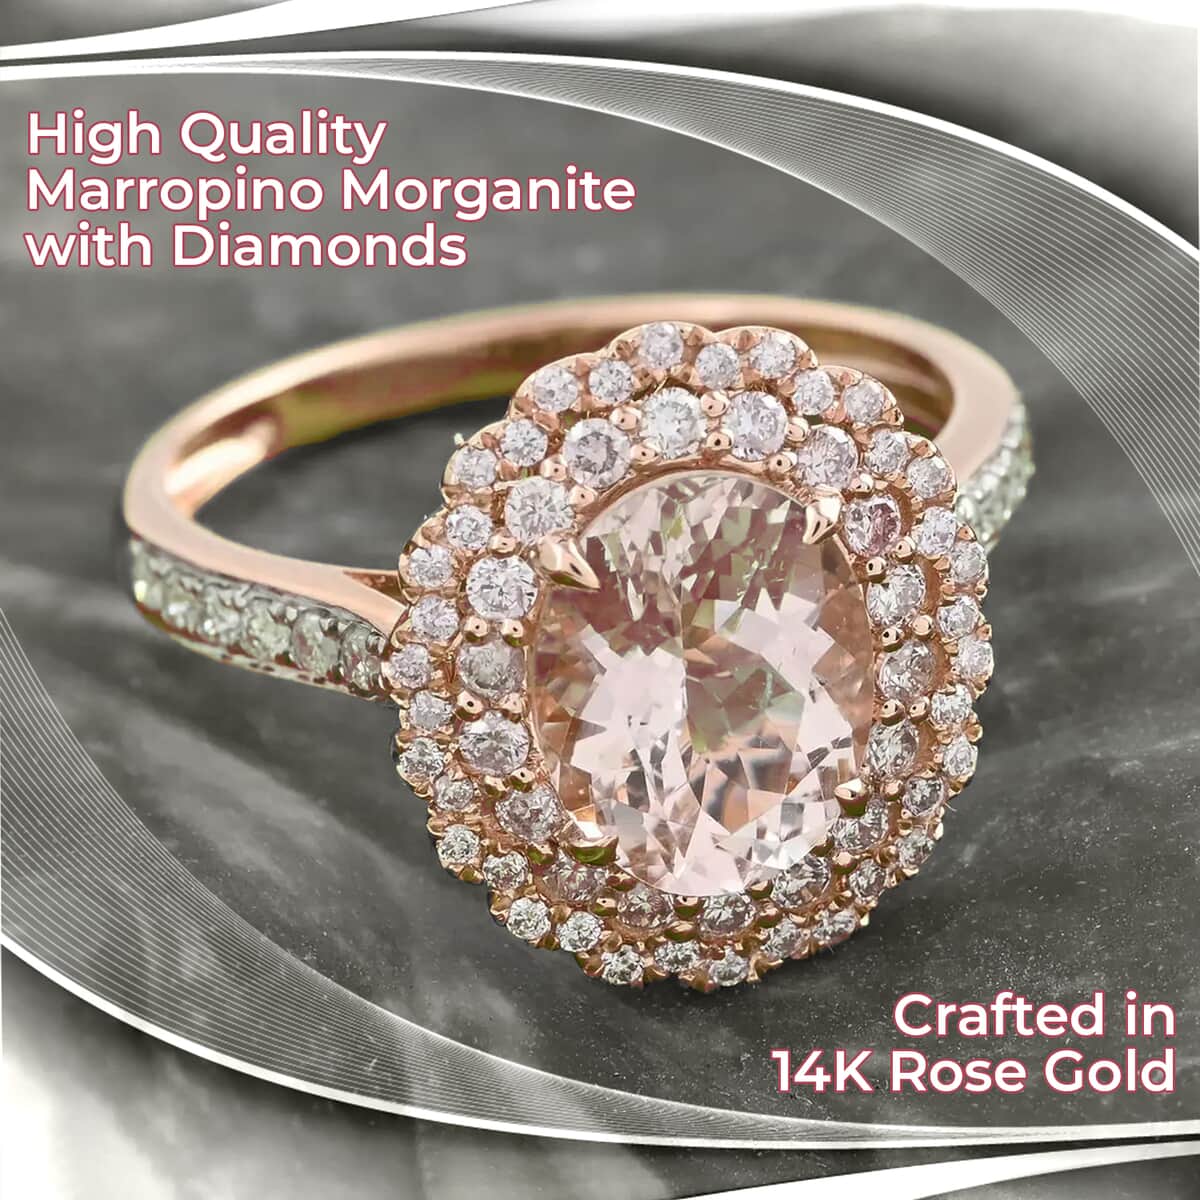 Ankur Treasure Chest Modani Marropino Morganite Ring, 14K Rose Gold Ring, Diamond Floral Halo Ring, Natural Pink And White Diamond Accent Ring 1.95 ctw (Size 8.0) image number 1